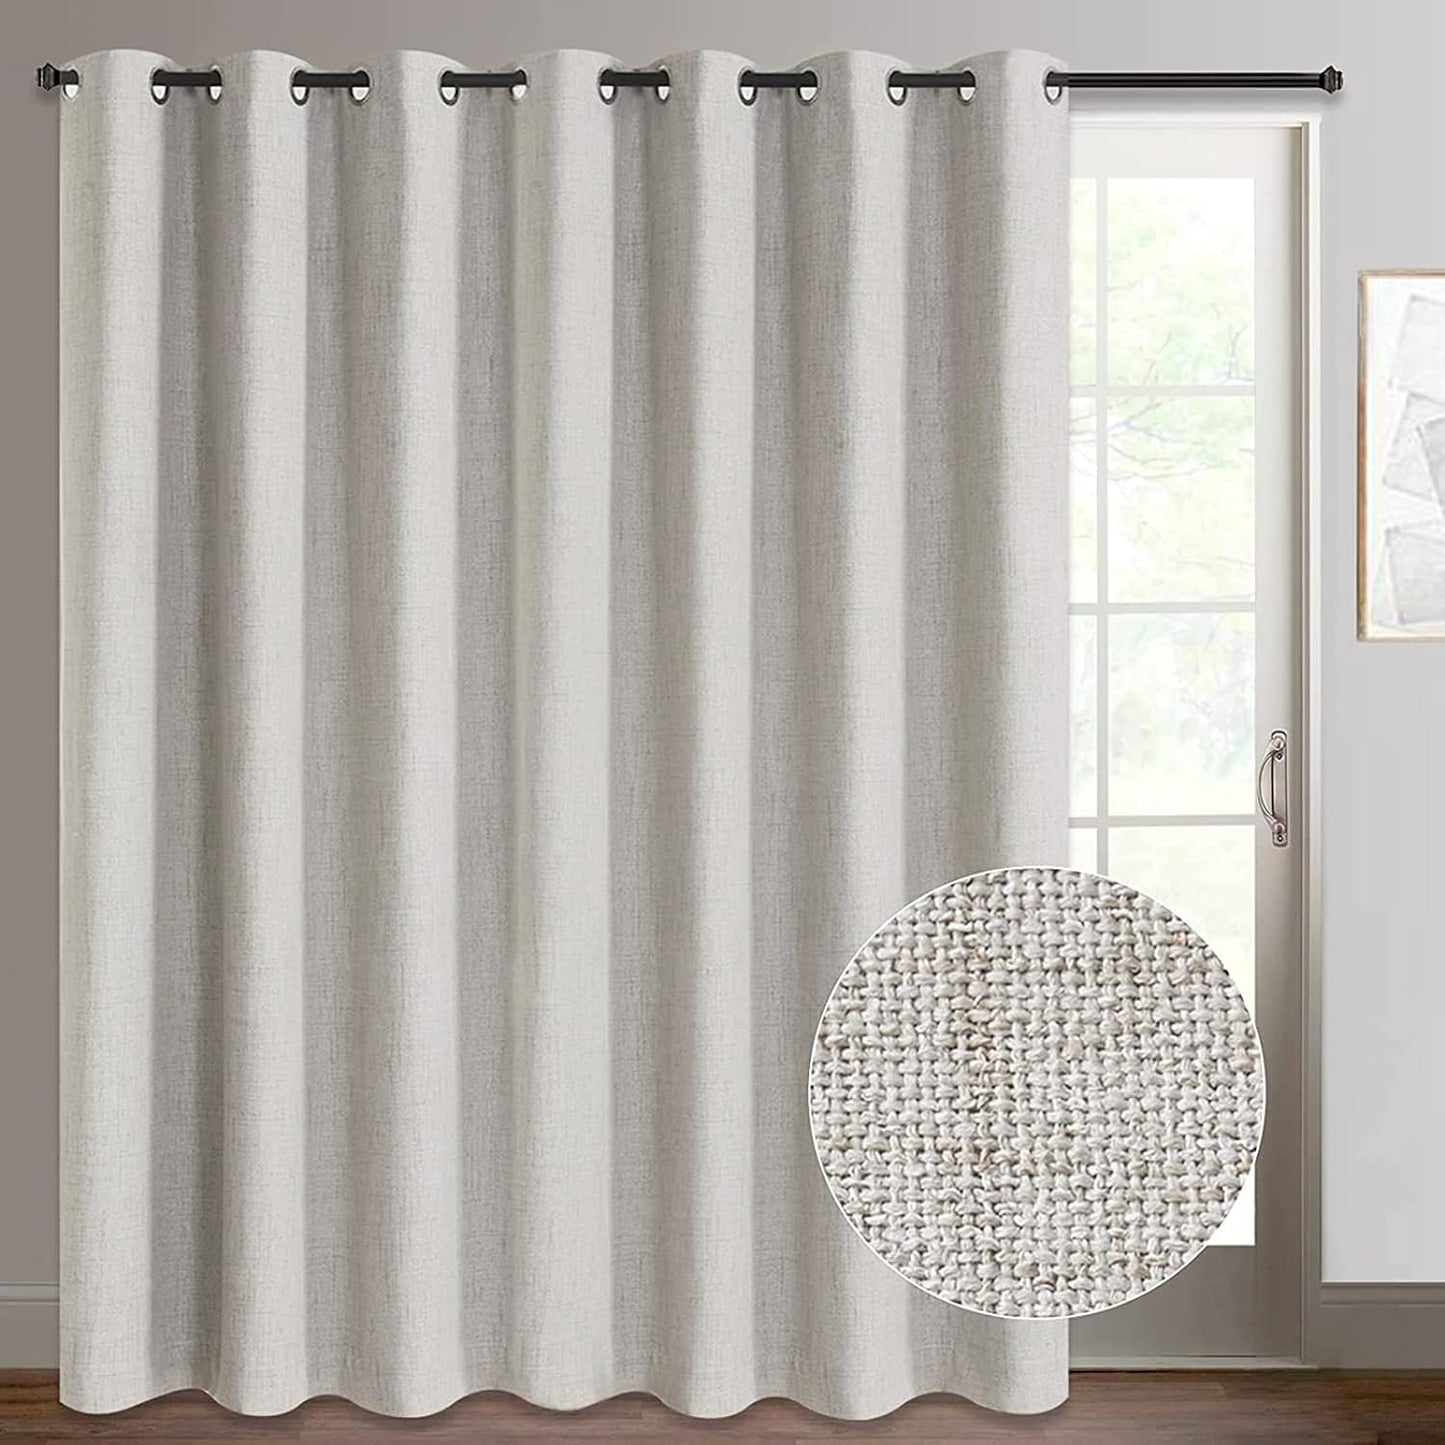 Rose Home Fashion Sliding Door Curtains, Primitive Linen Look 100% Blackout Curtains, Thermal Insulated Patio Door Curtains-1 Panel (W100 X L84, Grey)  Rose Home Fashion Beige W100 X L96|1 Panel 